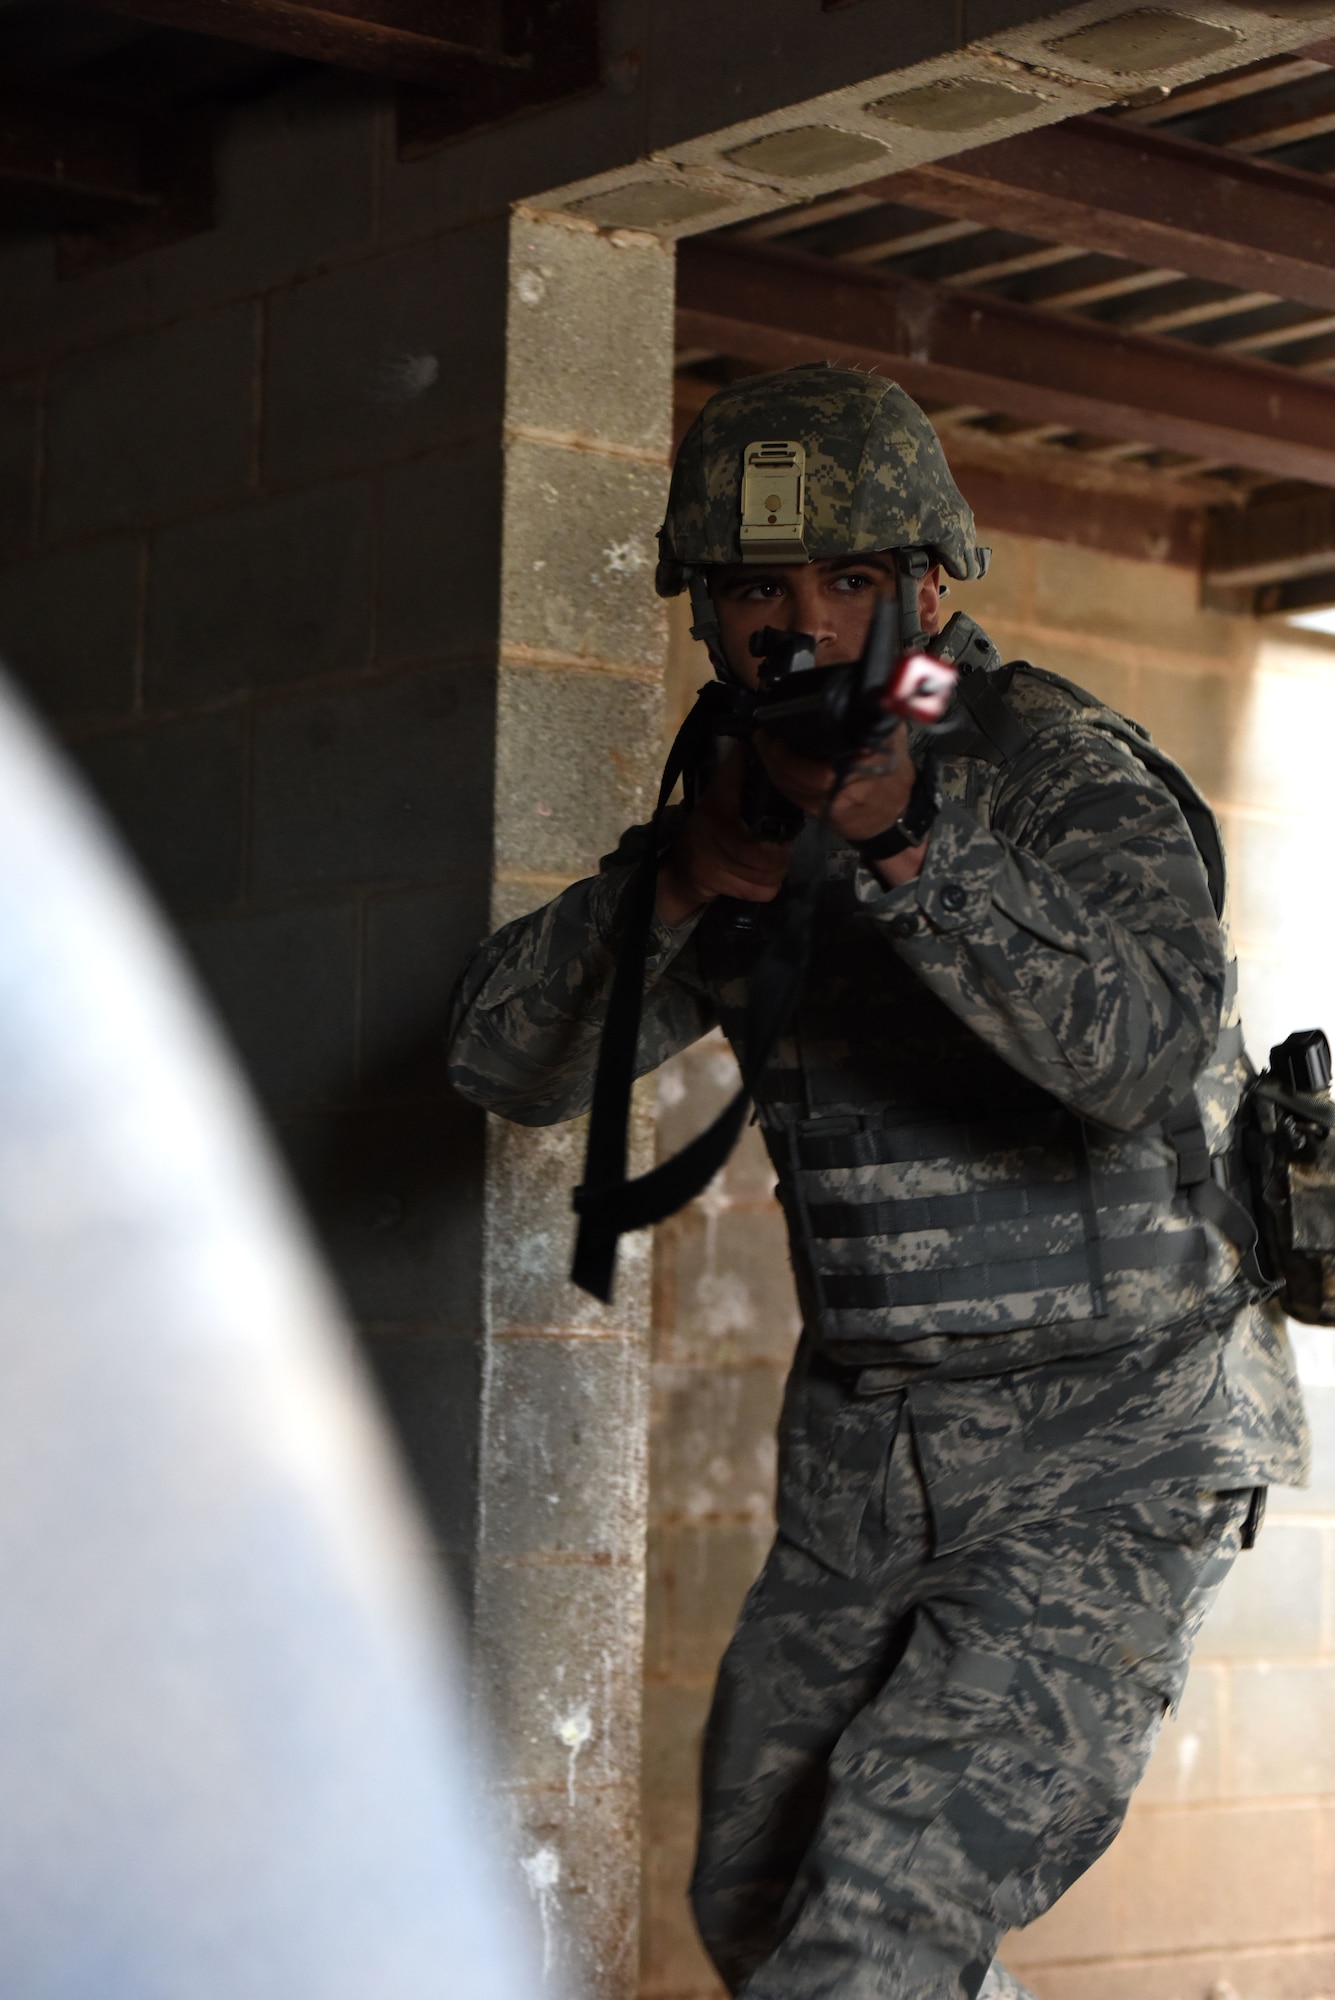 Andrew Burrola, Angelo State University Air Force ROTC cadet, practices room clearing techniques during a training exercise at the mock forward operating base on Goodfellow Air Force Base, Texas, April 20, 2018. The cadets had to use the skills learned during the training exercise when accomplishing a variety of scenarios presented by instructors and cadres. (U.S. Air Force photo by Airman 1st Class Seraiah Hines/Released)